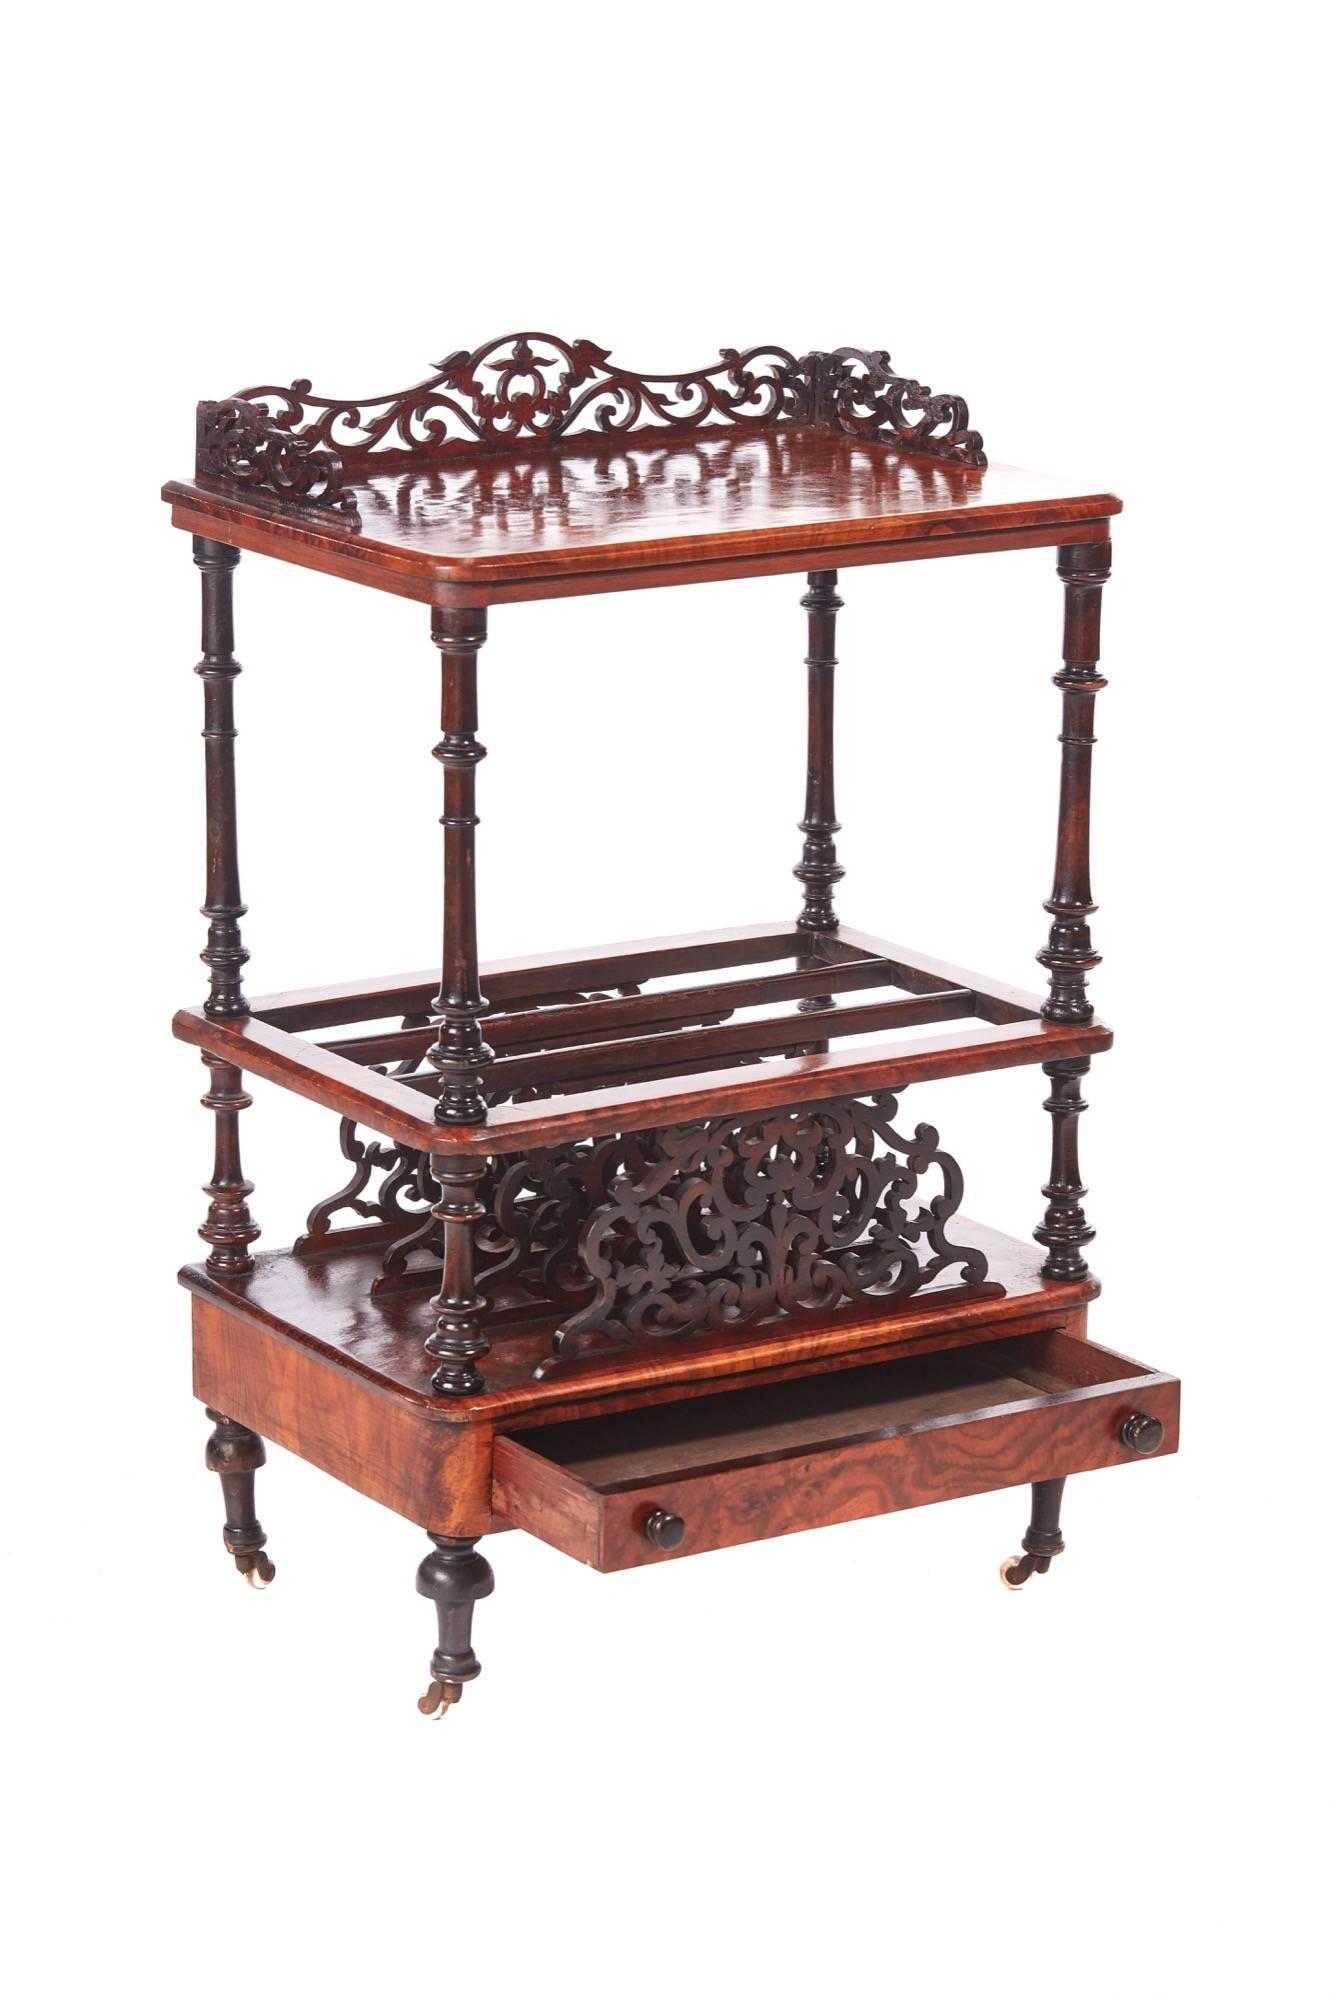 Victorian burr walnut Canterbury whatnot, with a shaped fretwork gallery, lovely burr walnut top, turned shaped column supports, three divisions with shaped fretwork, one burr walnut drawer with original turned knobs, standing on short turned legs,